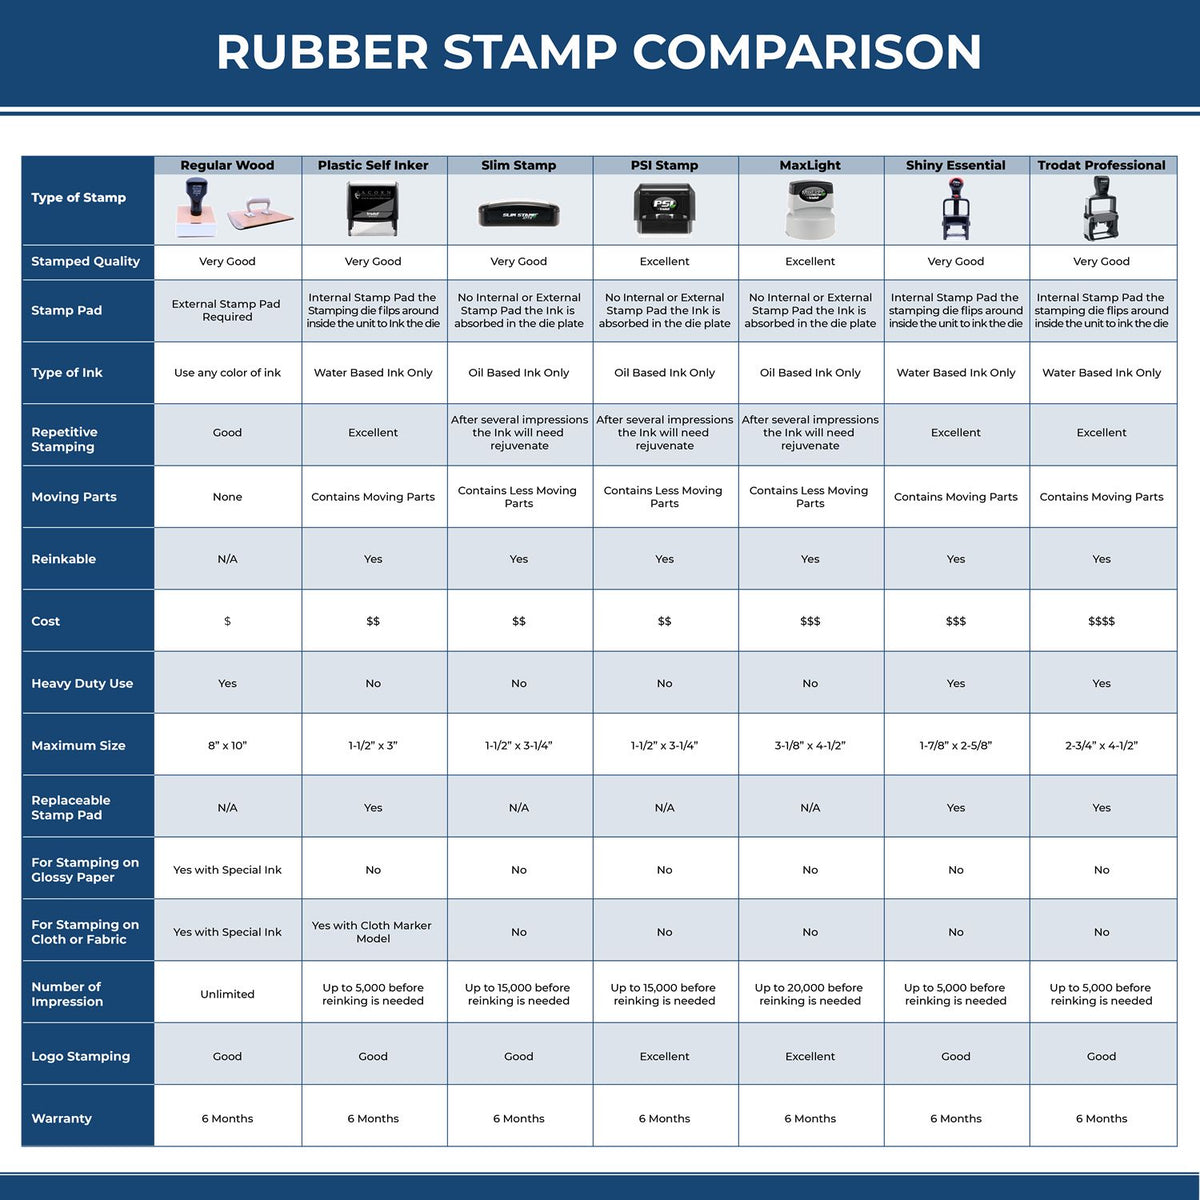 A comparison chart for the different types of mount models available for the Heavy-Duty Ohio Rectangular Notary Stamp.